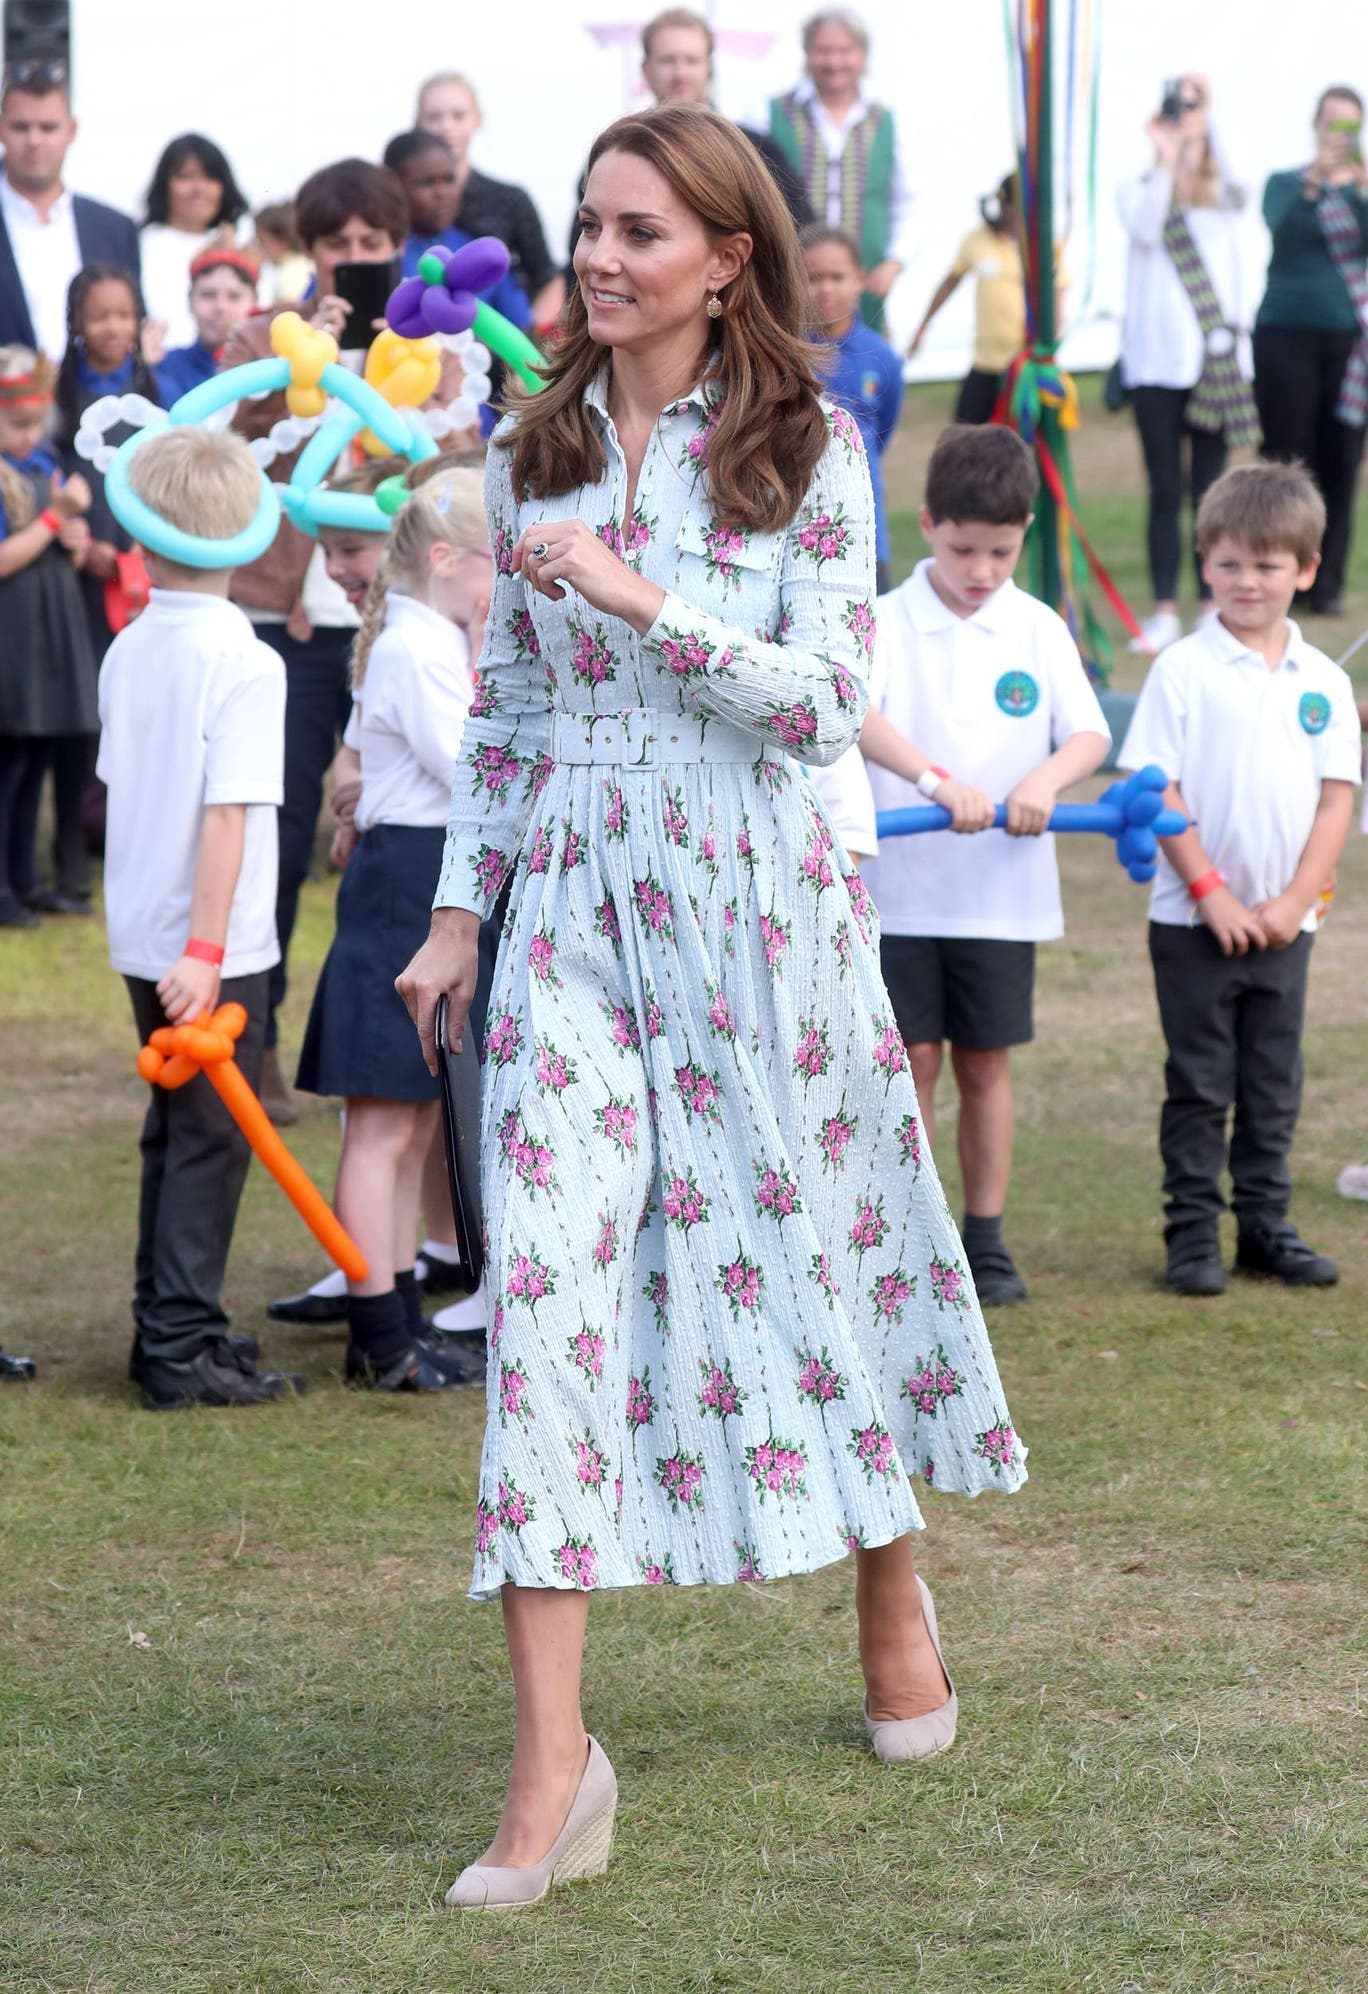 Kate completed the look with a pair of wedged heels